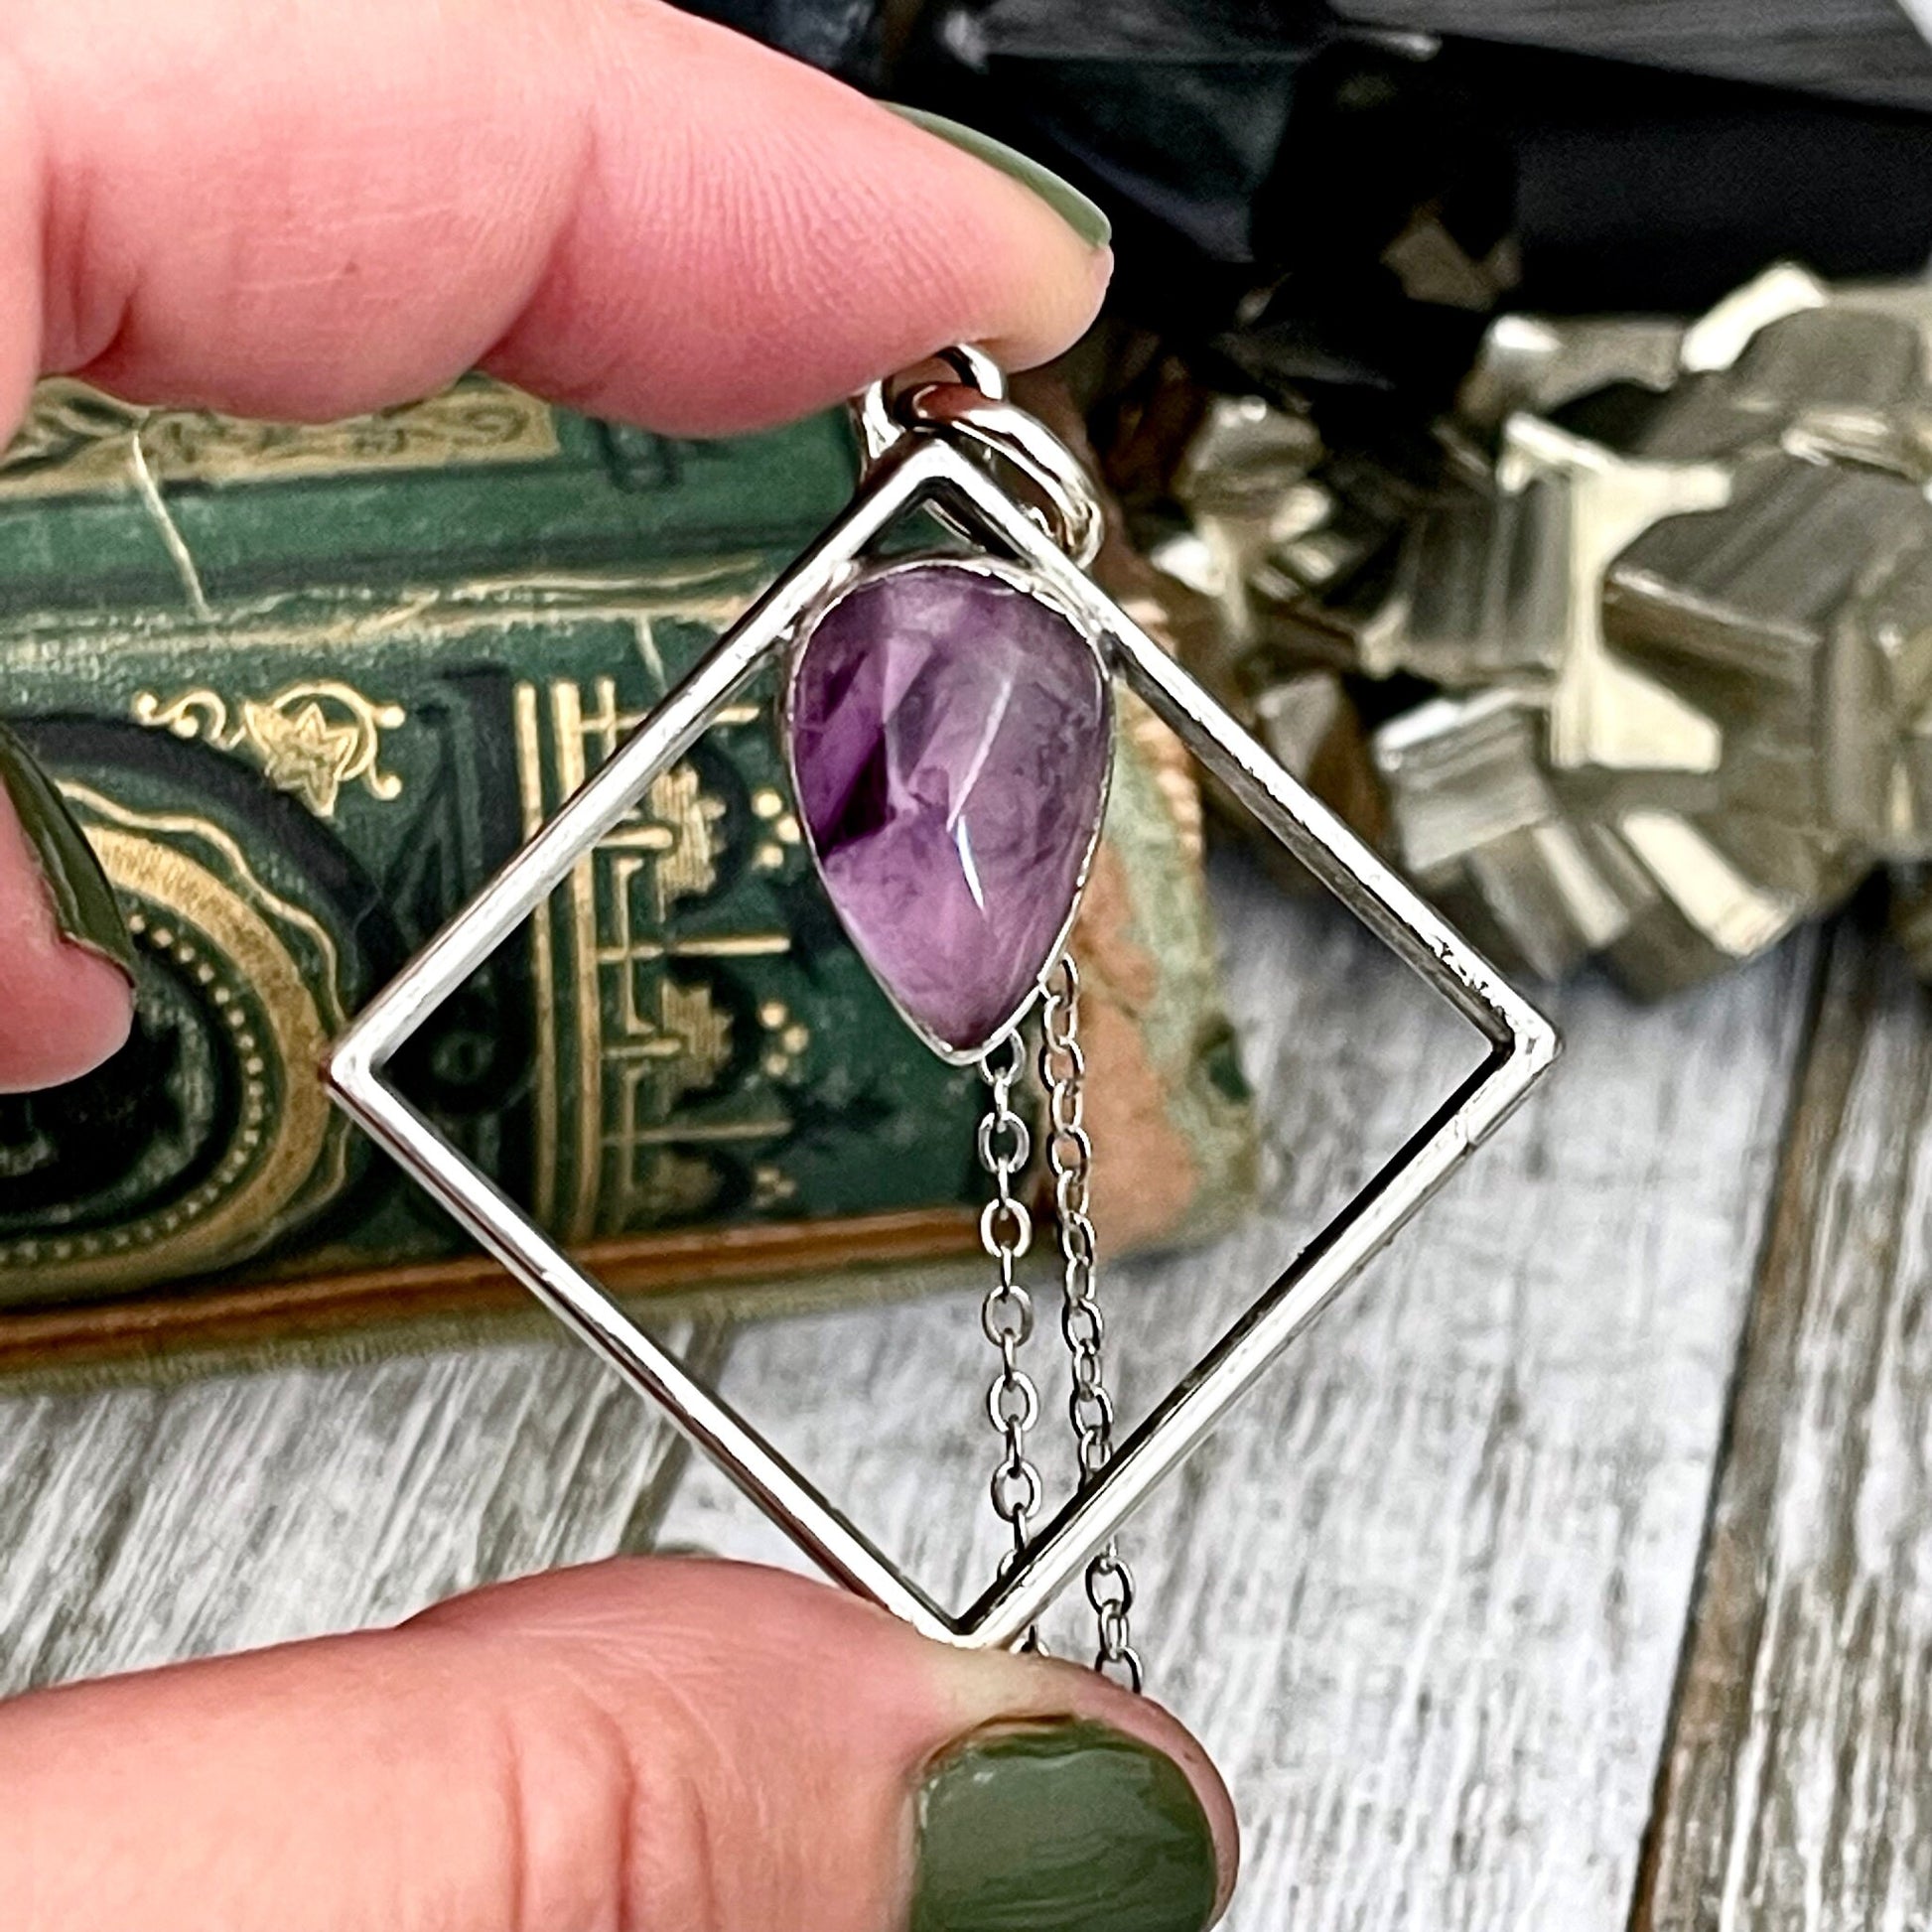 Amethyst Crystal Necklace Pendant in Fine Silver / Foxlark Collection - One of a Kind / Witchy Necklace Goth Jewelry / Gothic Jewelry